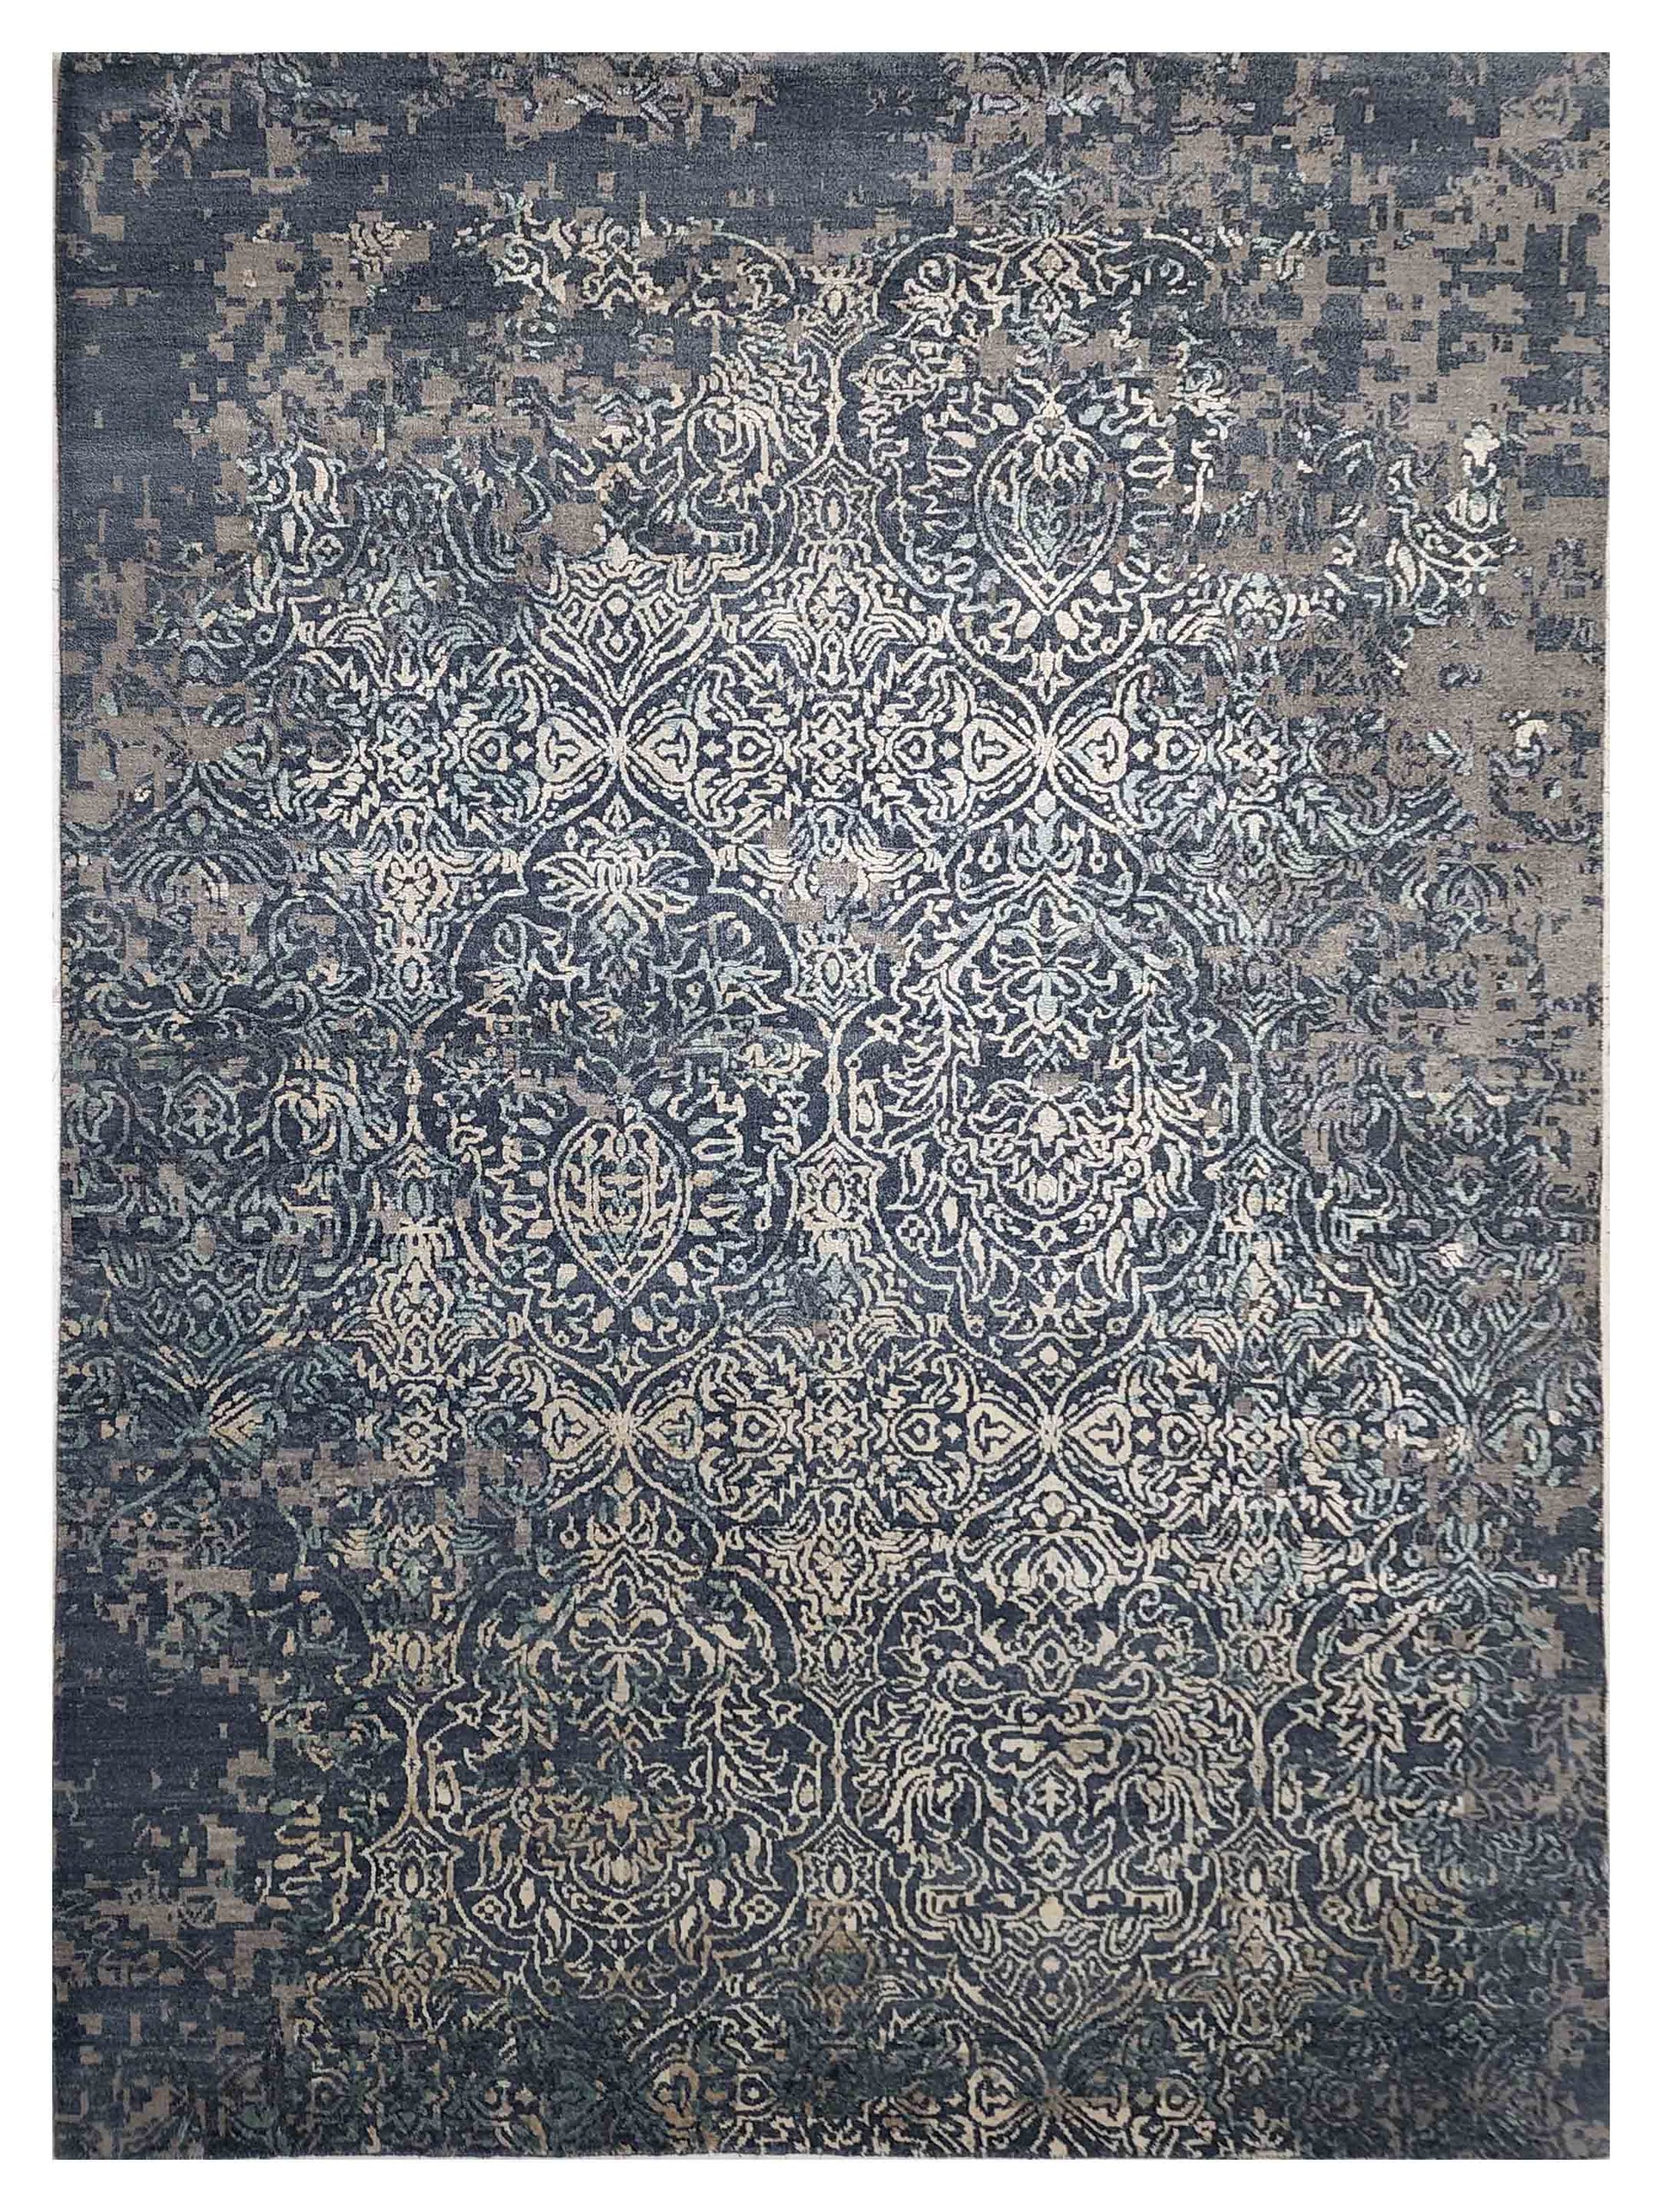 Artisan Bloom PW-910 Sky Blue Transitional Knotted Rug